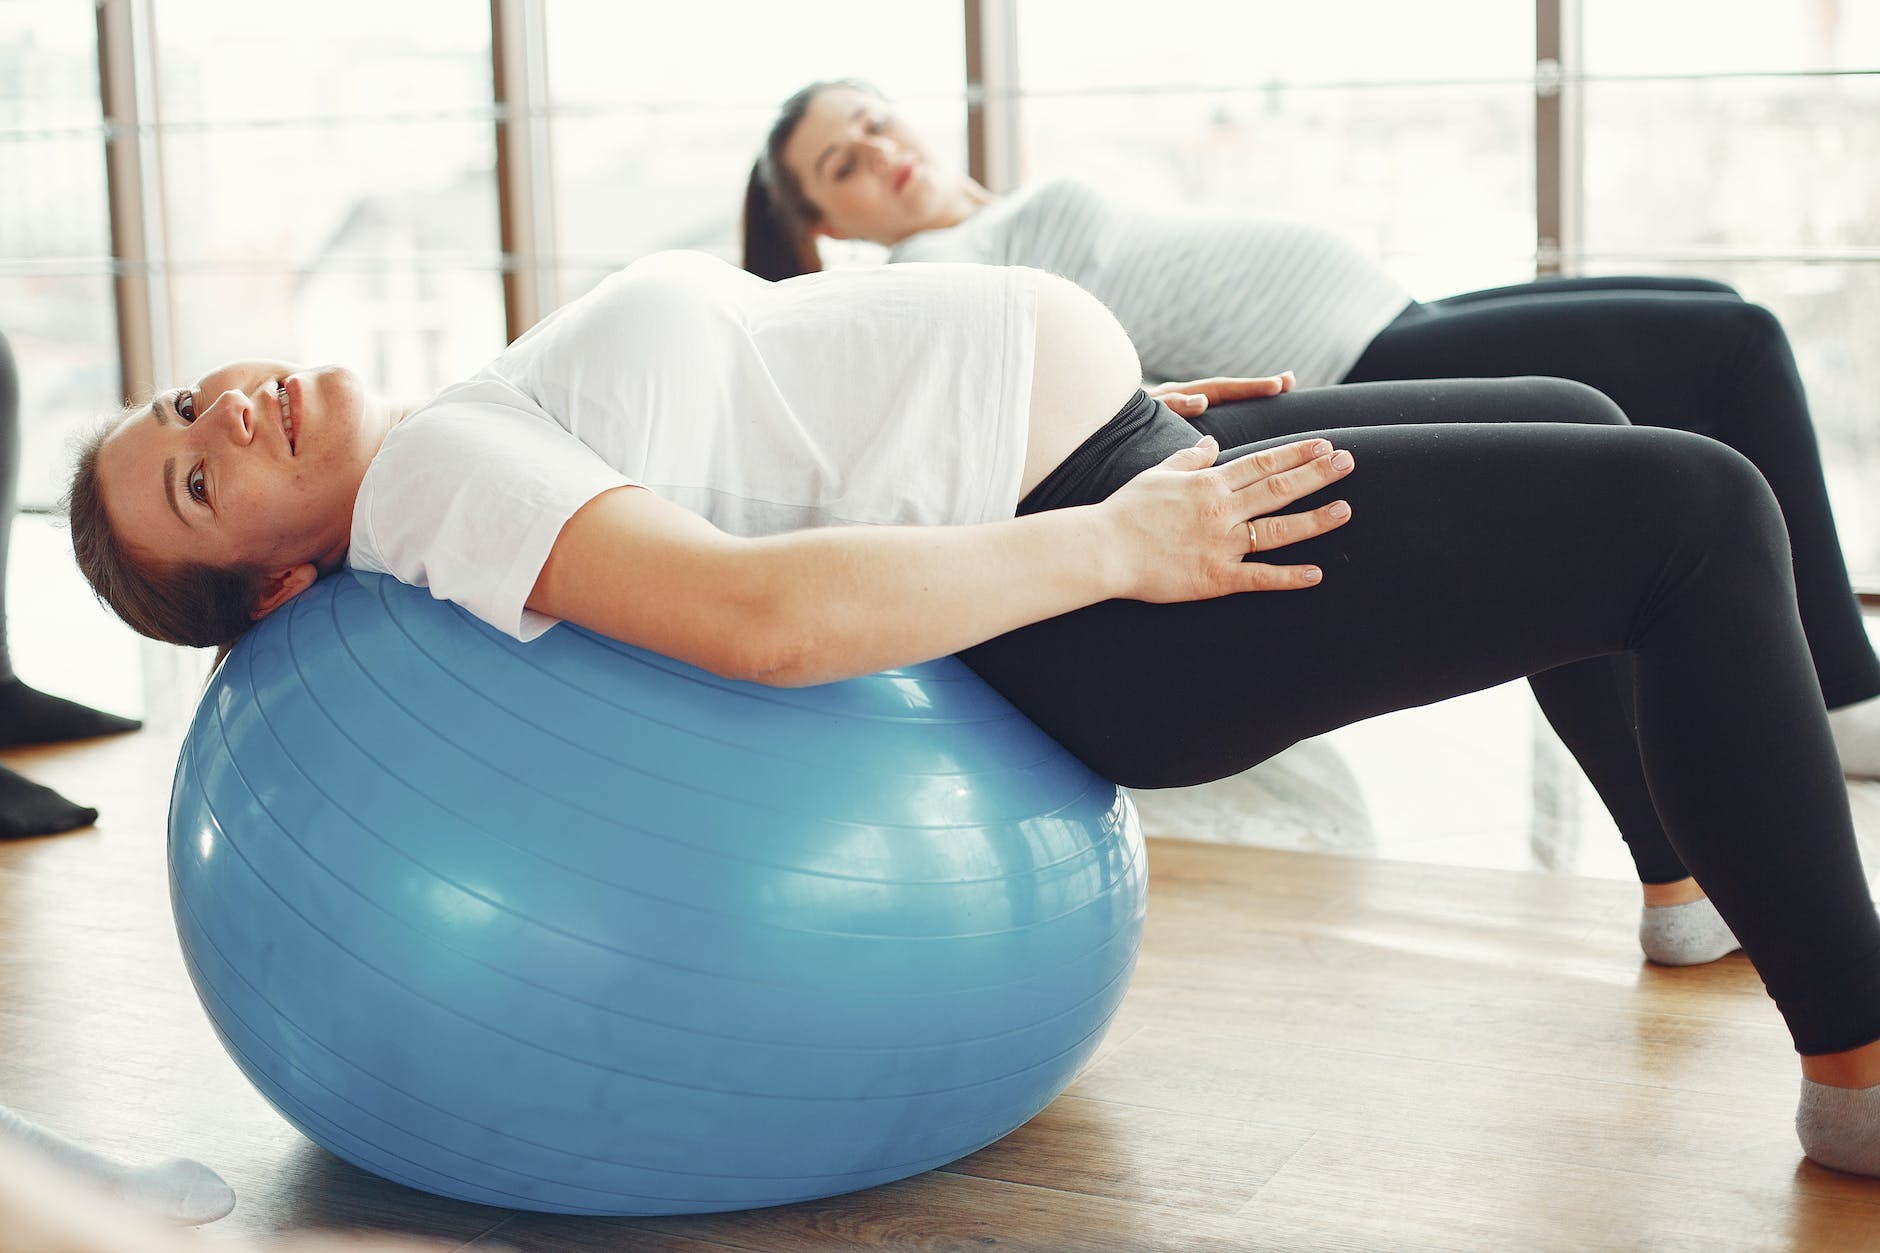 woman in white t shirt and black leggings stretching on blue exercise ball